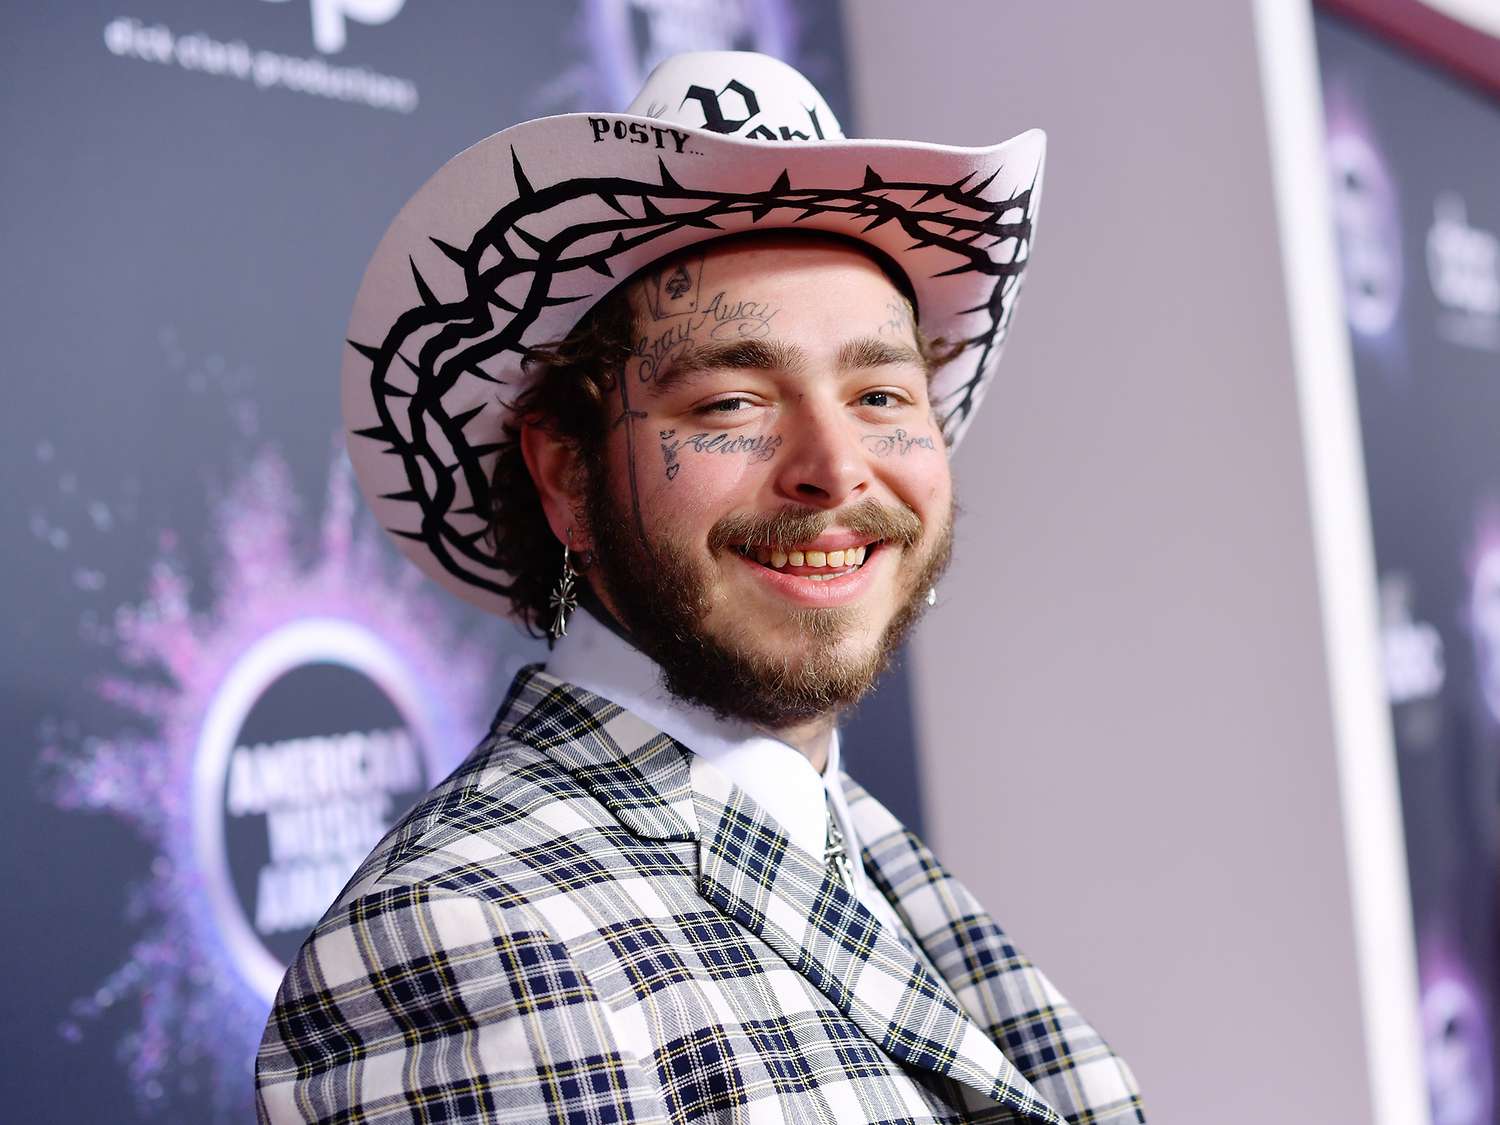 Post Malone attends the 2019 American Music Awards at Microsoft Theater on November 24, 2019 in Los Angeles, California